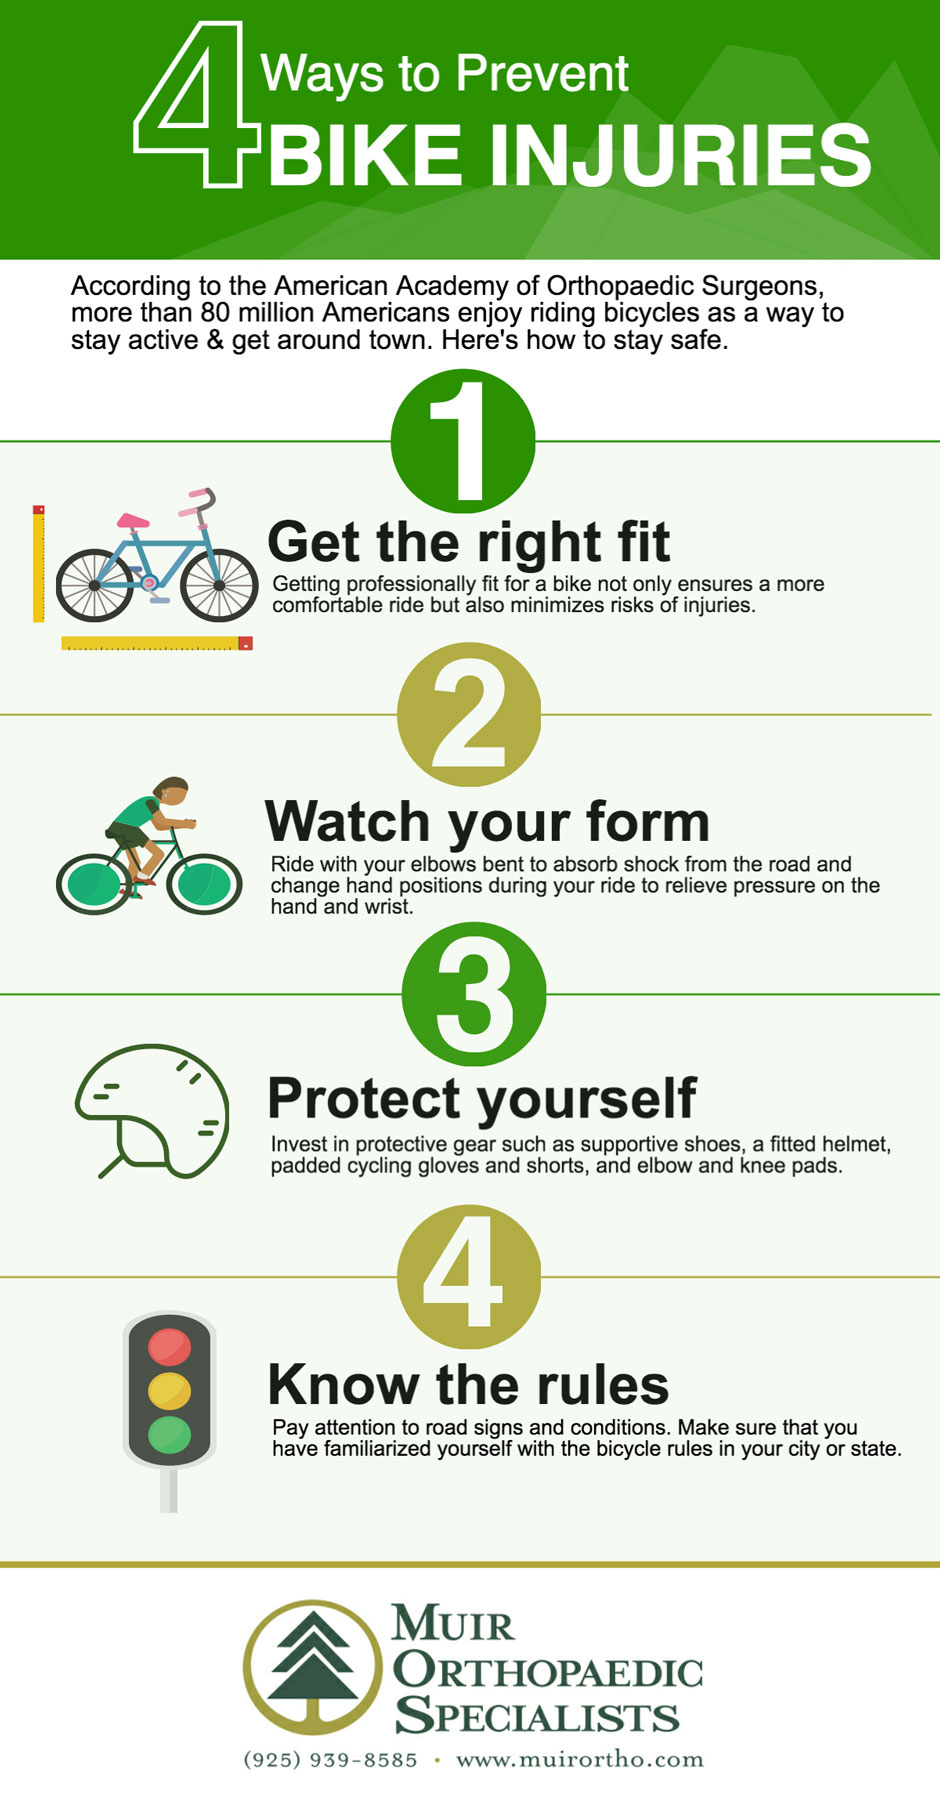 4 Ways to Prevent Bike Injuries infographic